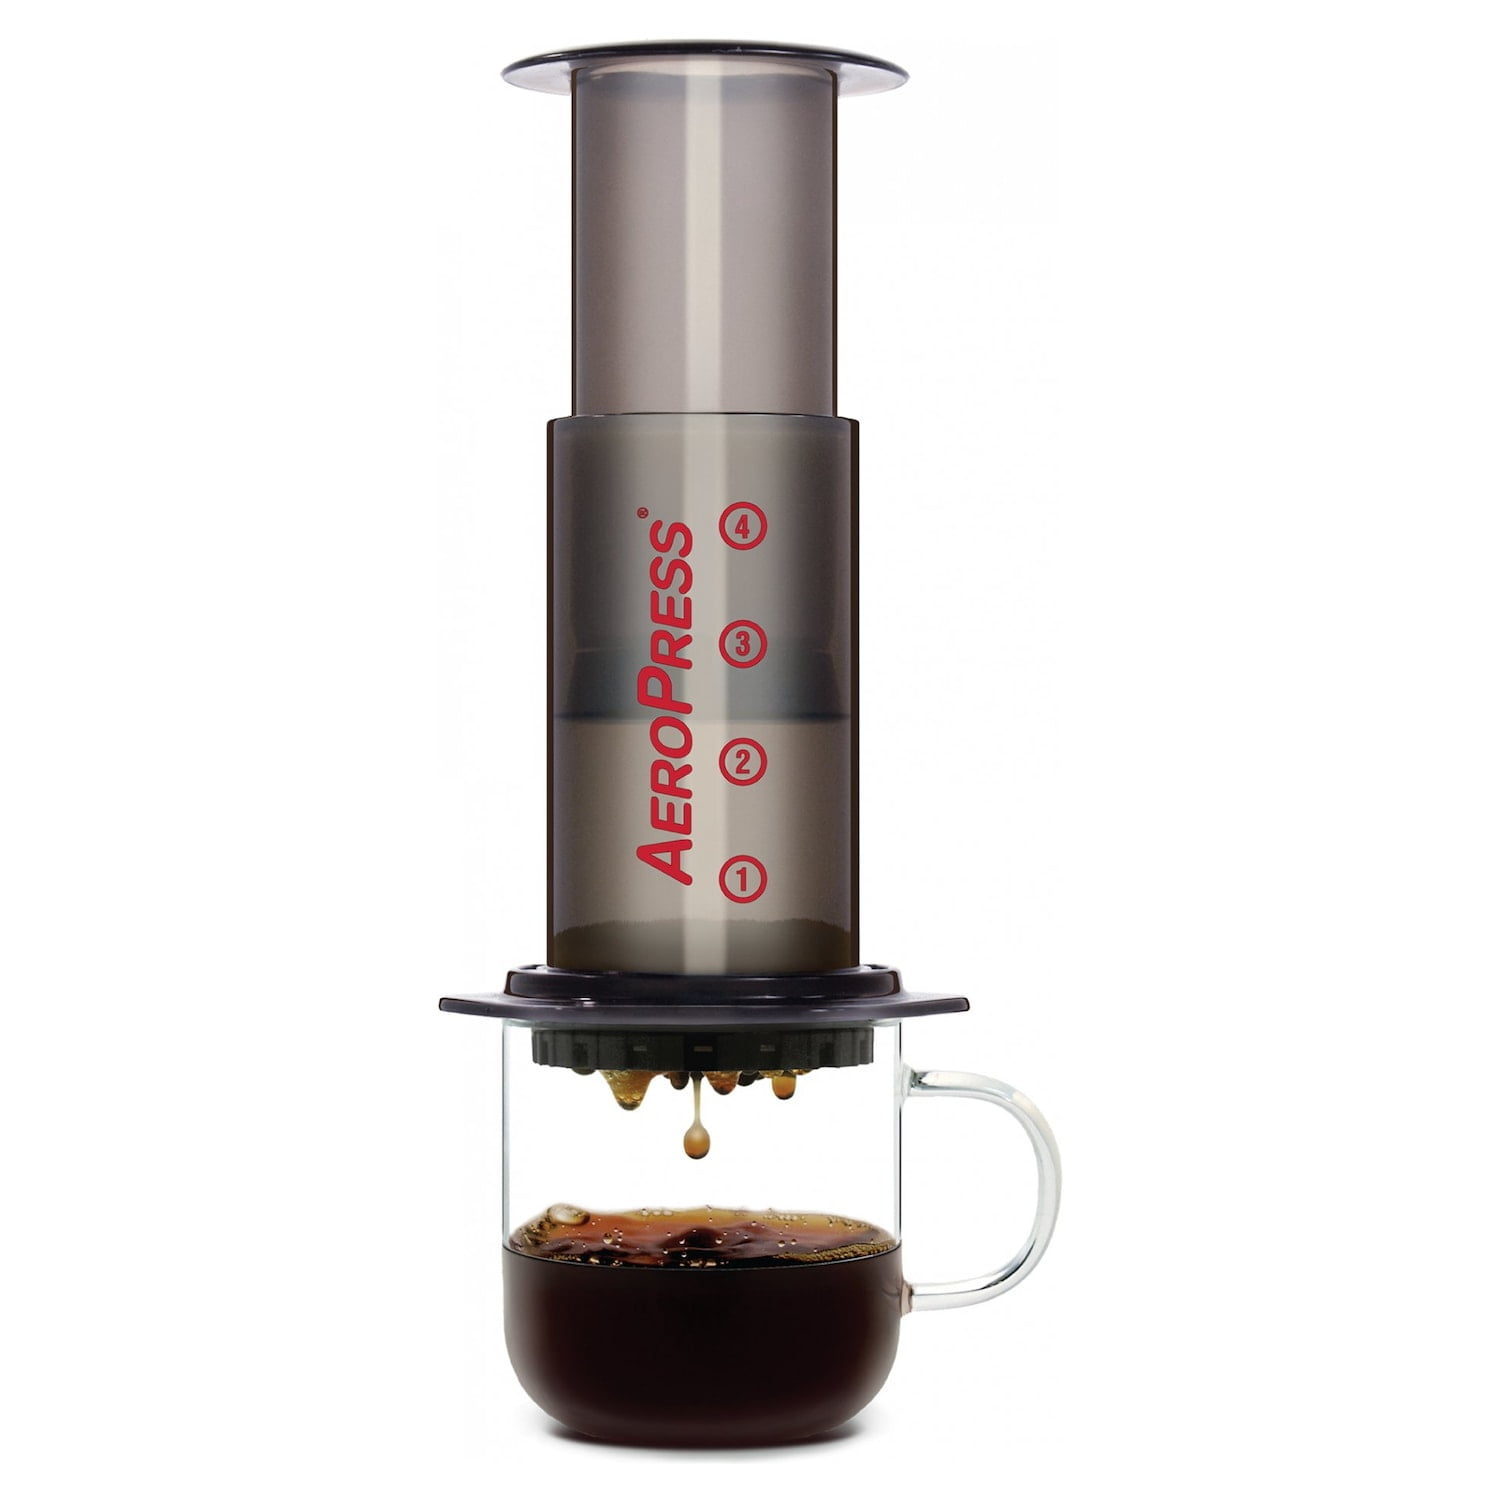 Aeropress Coffee And Espresso Maker Quickly Makes Delicious Coffee Without Bitterness 1 To 3